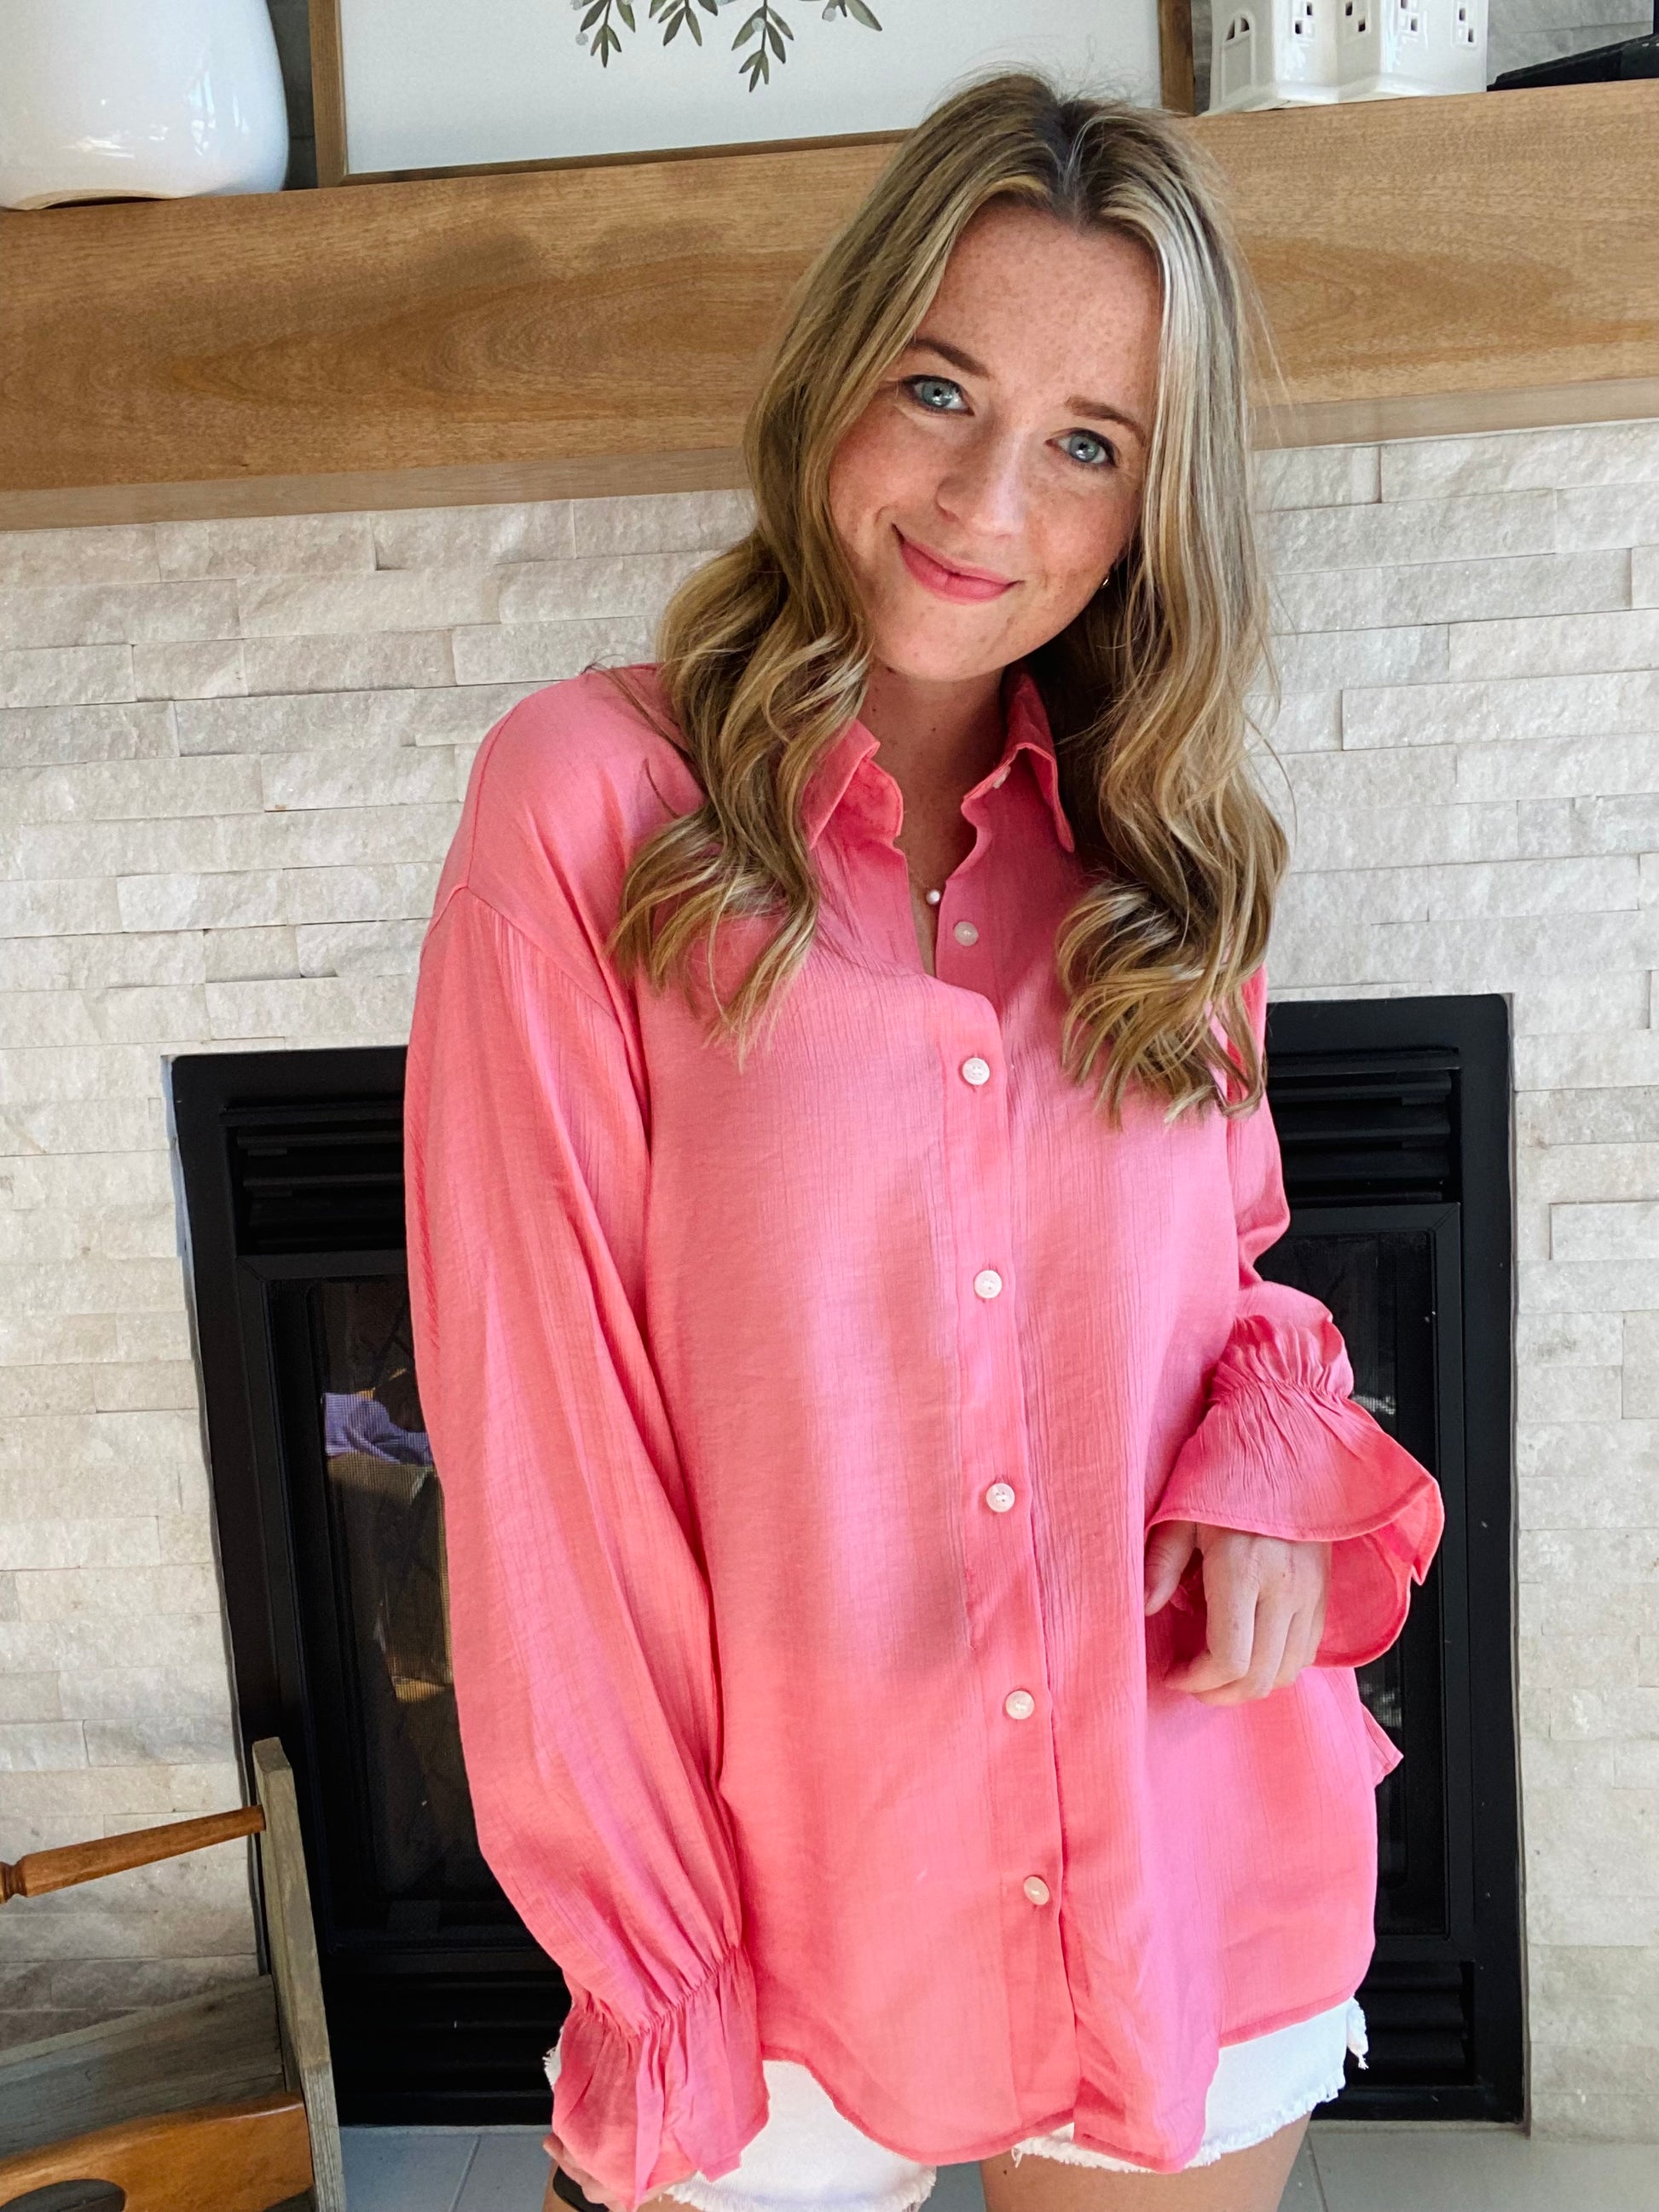 This Gauzy Bell Sleeve Blouse is crafted from lightweight polyester and spandex for an ultra-airy feel and relaxed fit. This blouse features baby bell sleeves and a collar, with functional buttons to ensure a perfect fit. The gauze fabric has a mild sheerness for an elegant look.